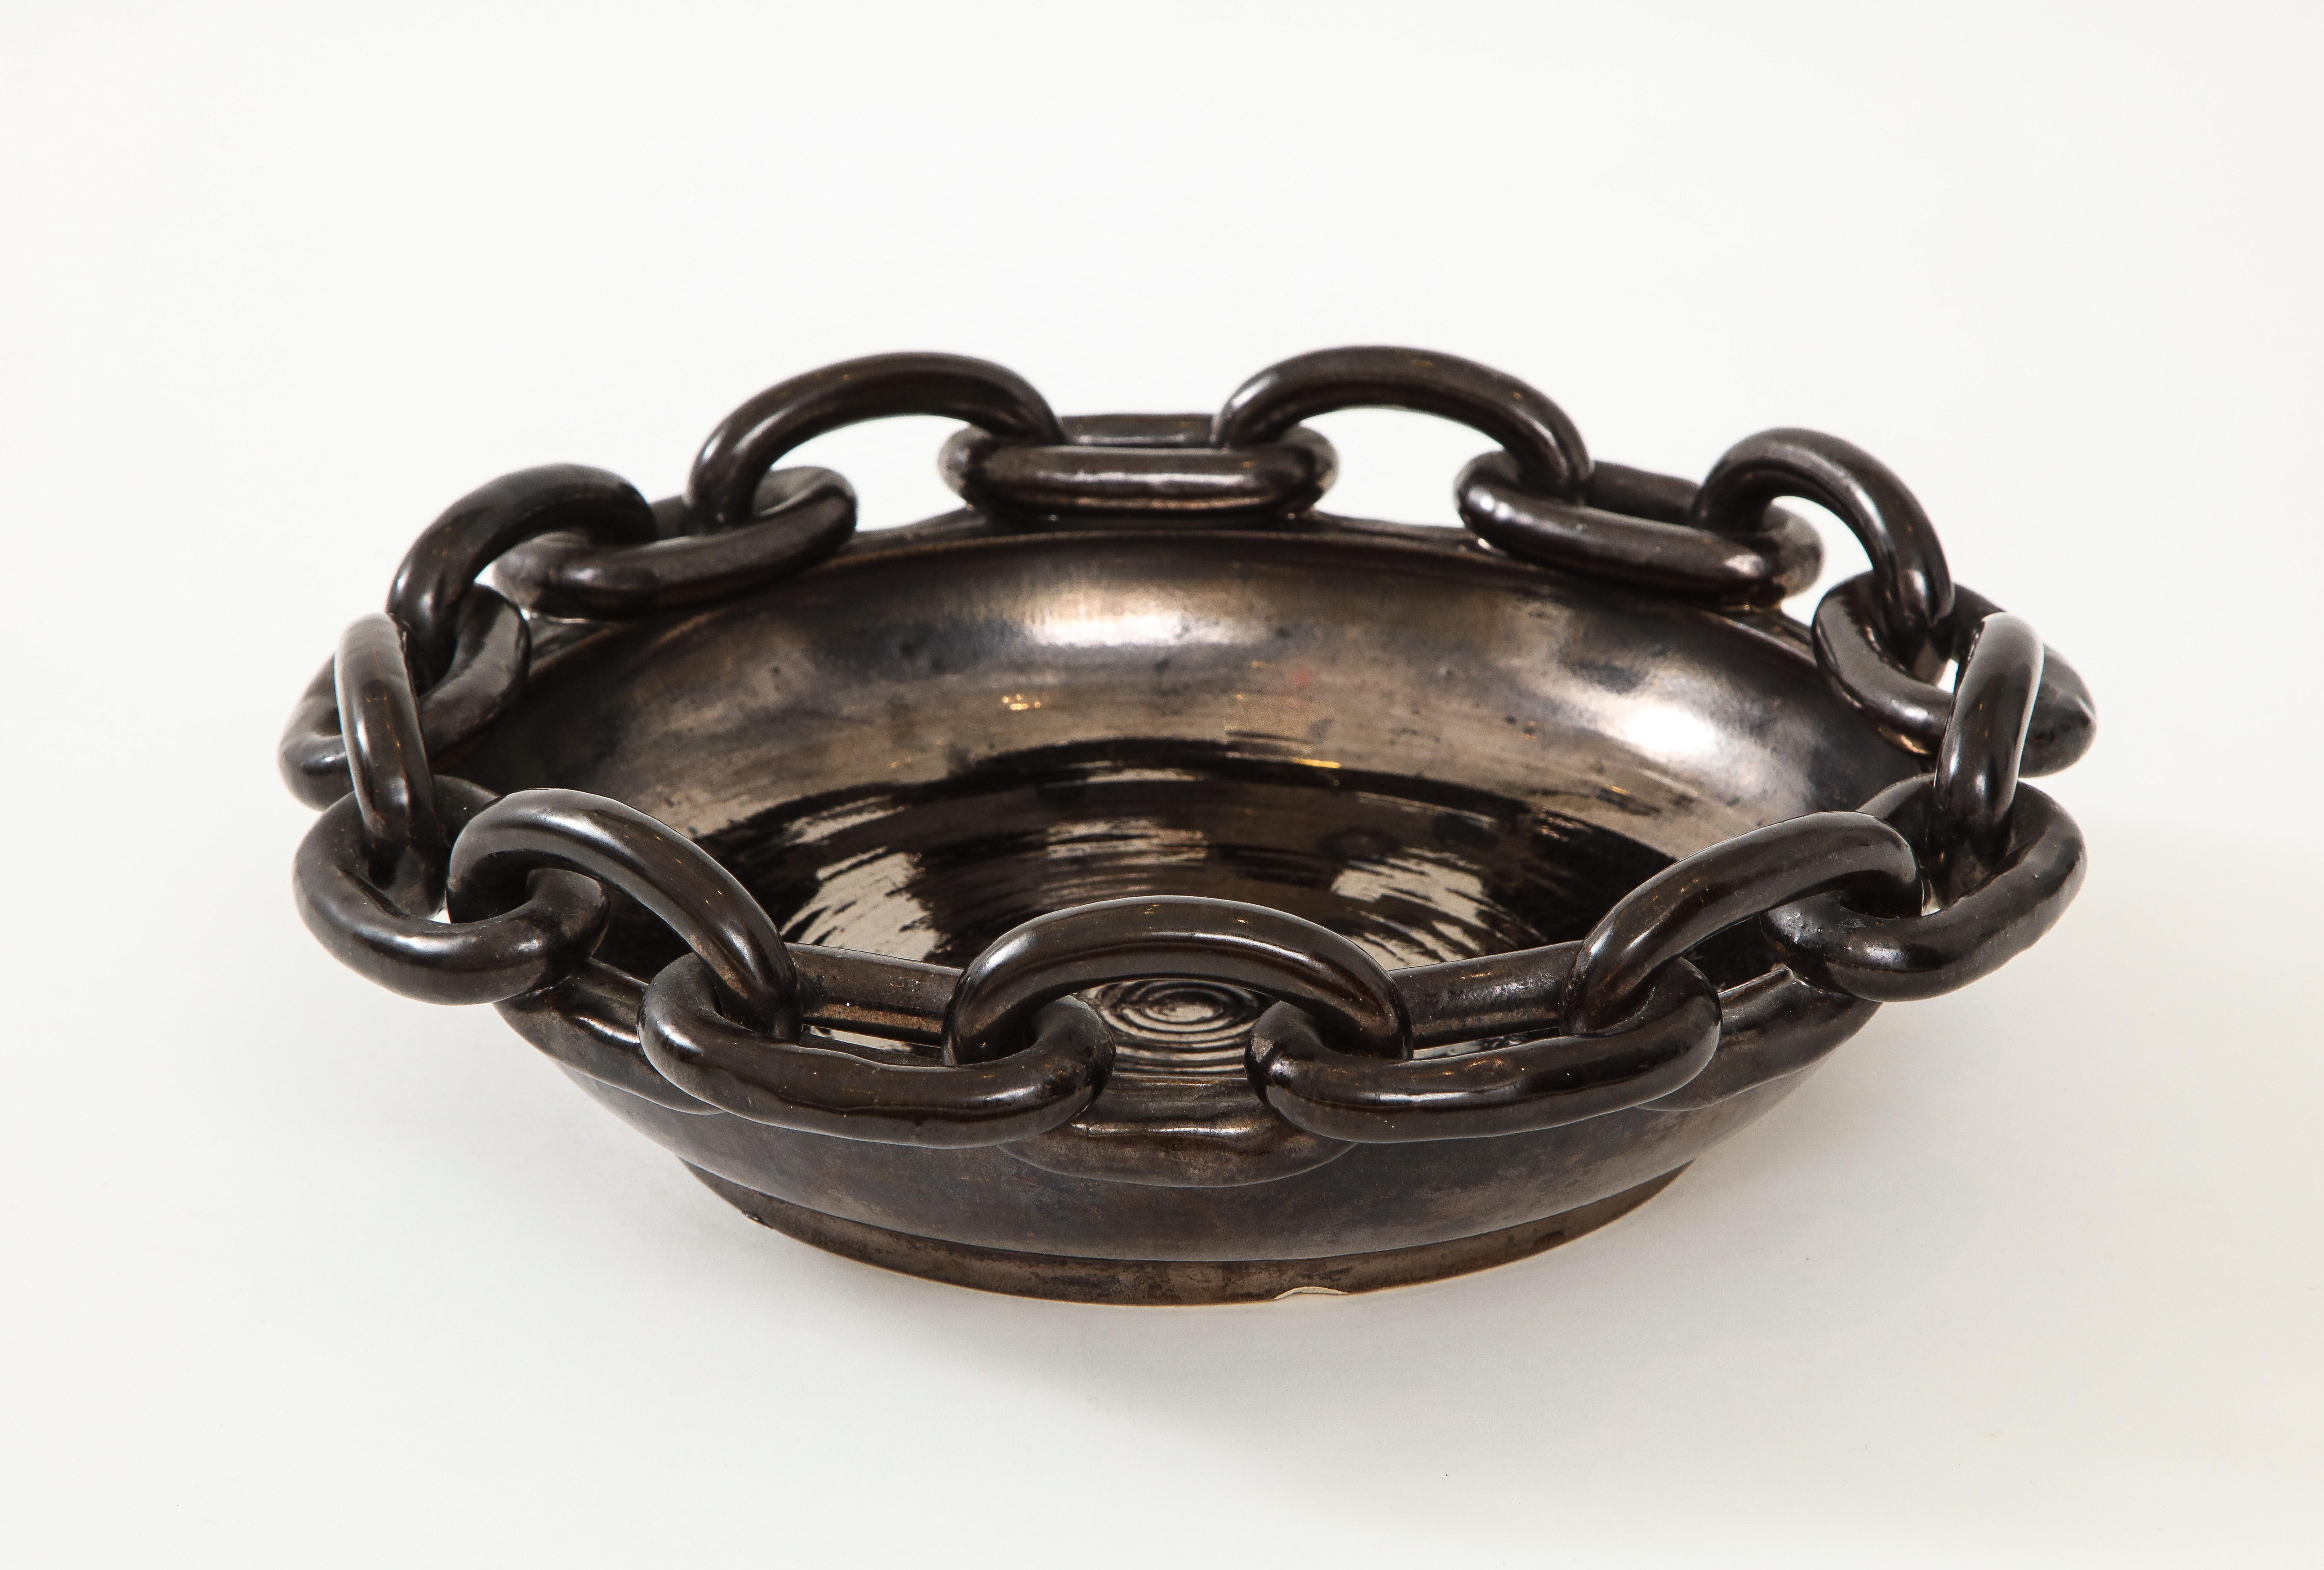 Signed large black ceramic circular bowl with chain link, detail by Jerome Massier, Vallauris, France, circa 1950.